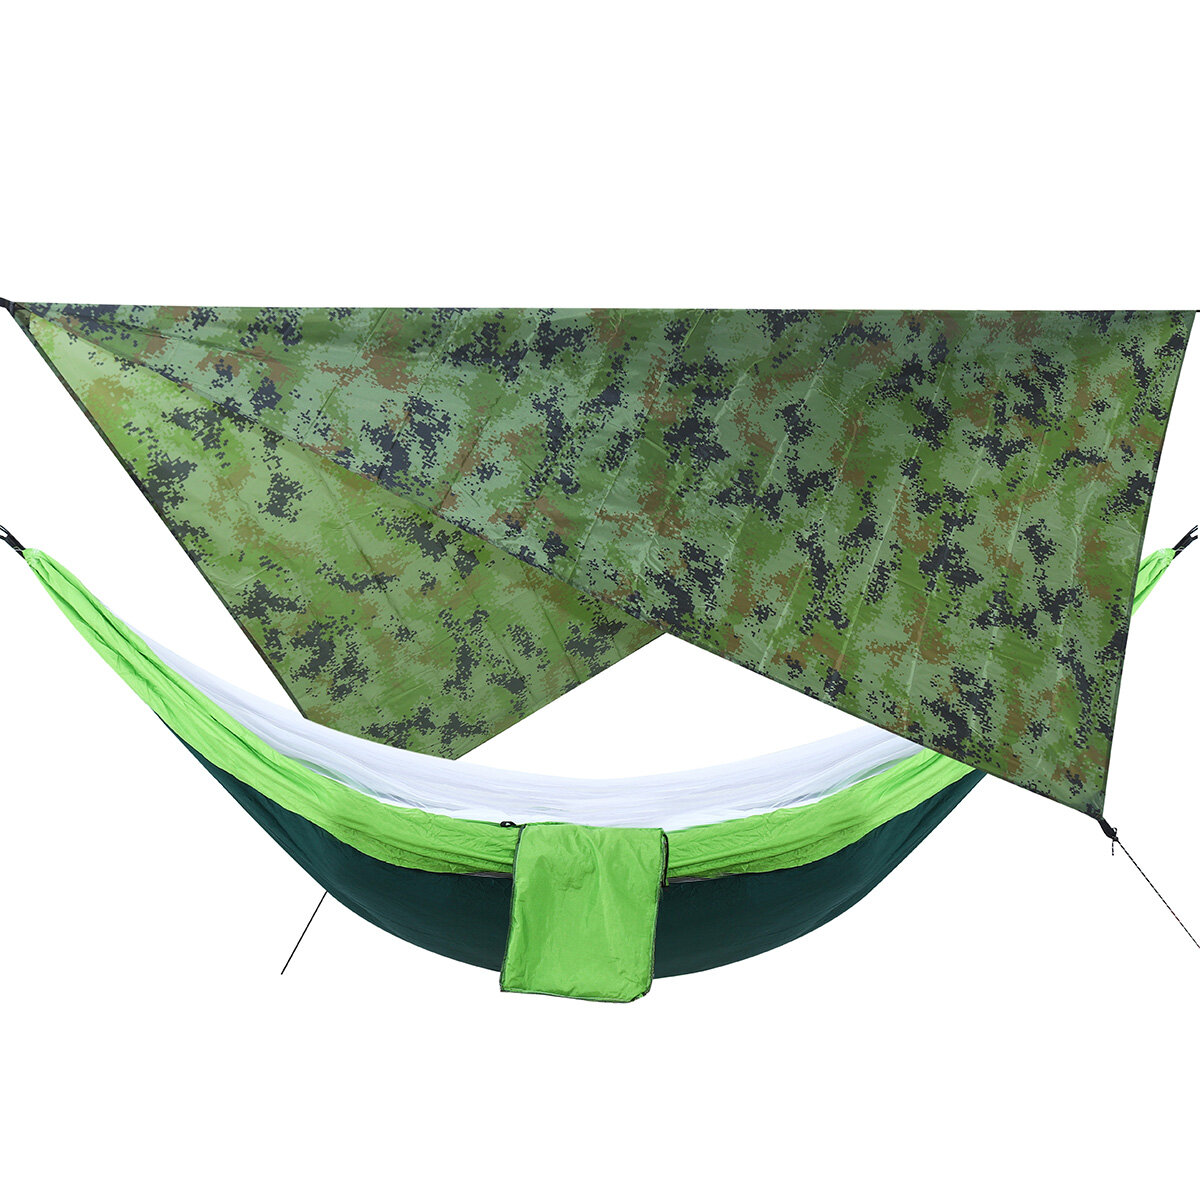 IPRee Camouflage Rain Fly Tarp and Camping Hammock with Mosquito Net Portable Hammock Canopy 210T Pl